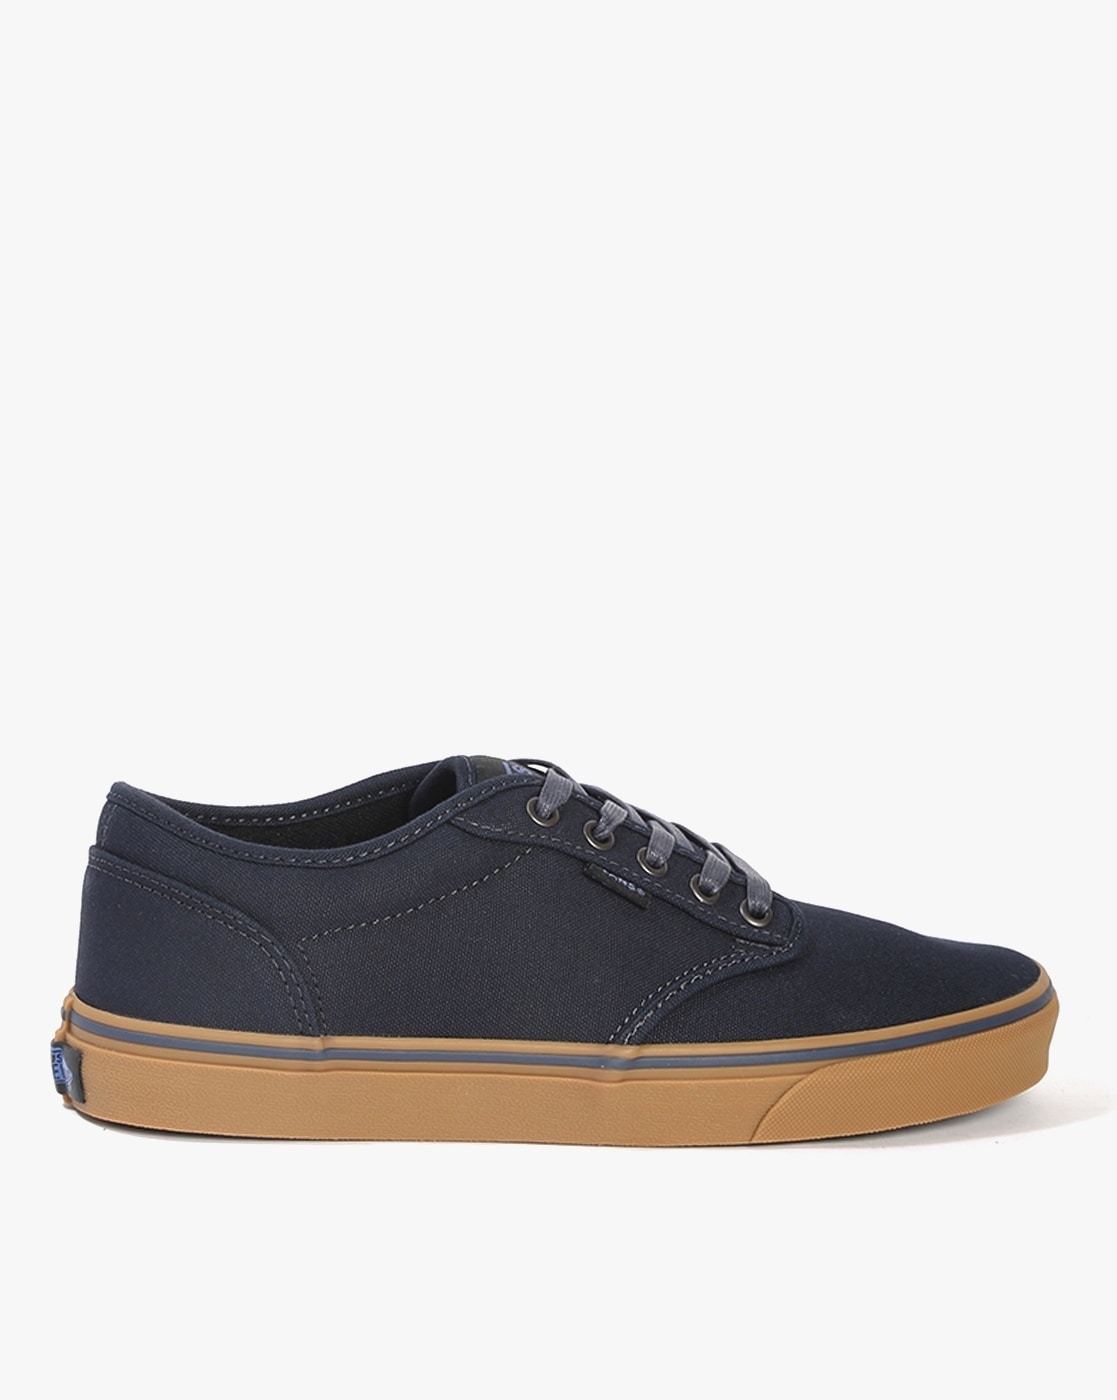 Top more than 138 vans atwood deluxe sneaker